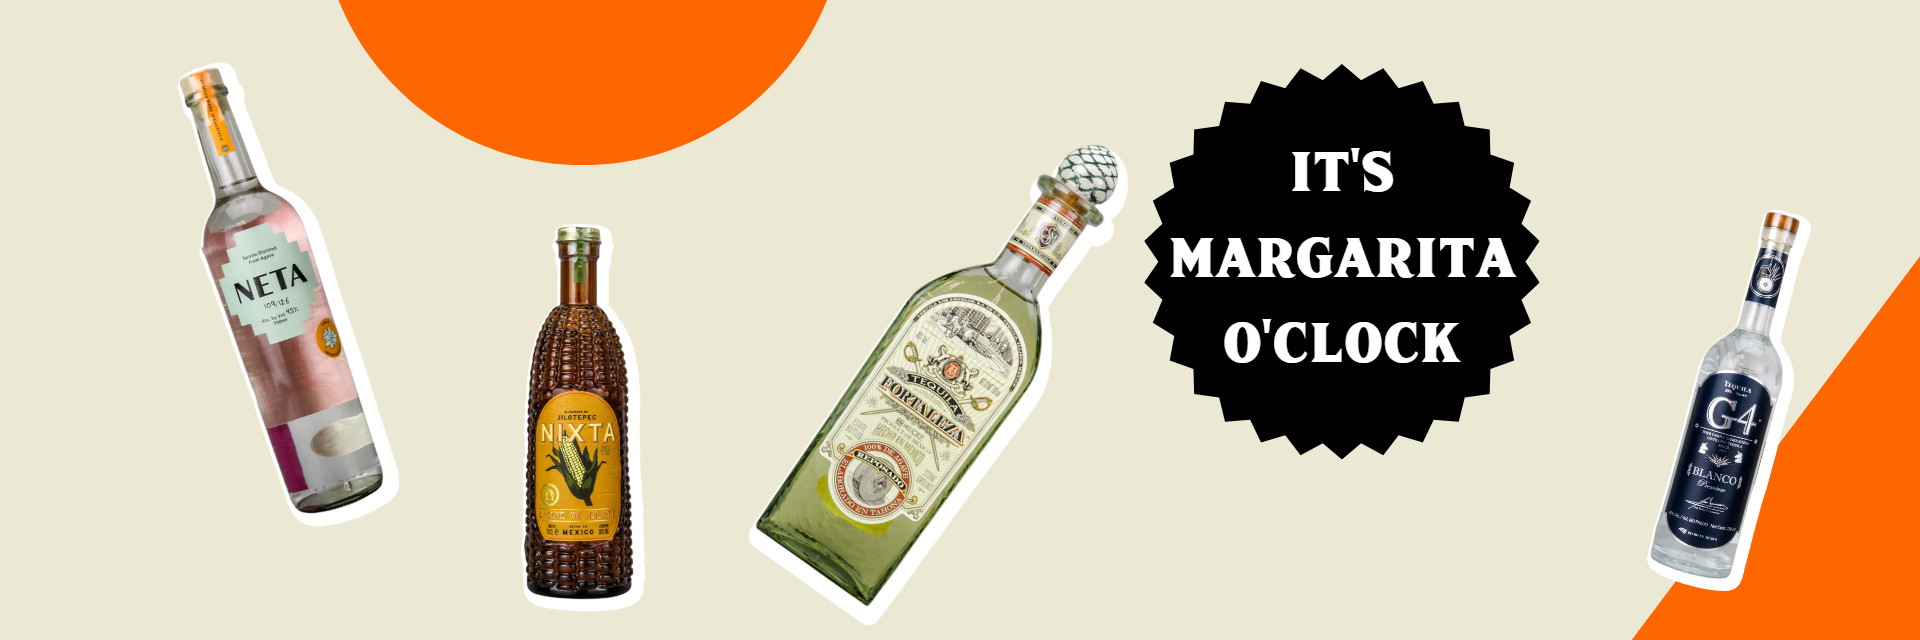 Mexican Agave Spirits - banner image